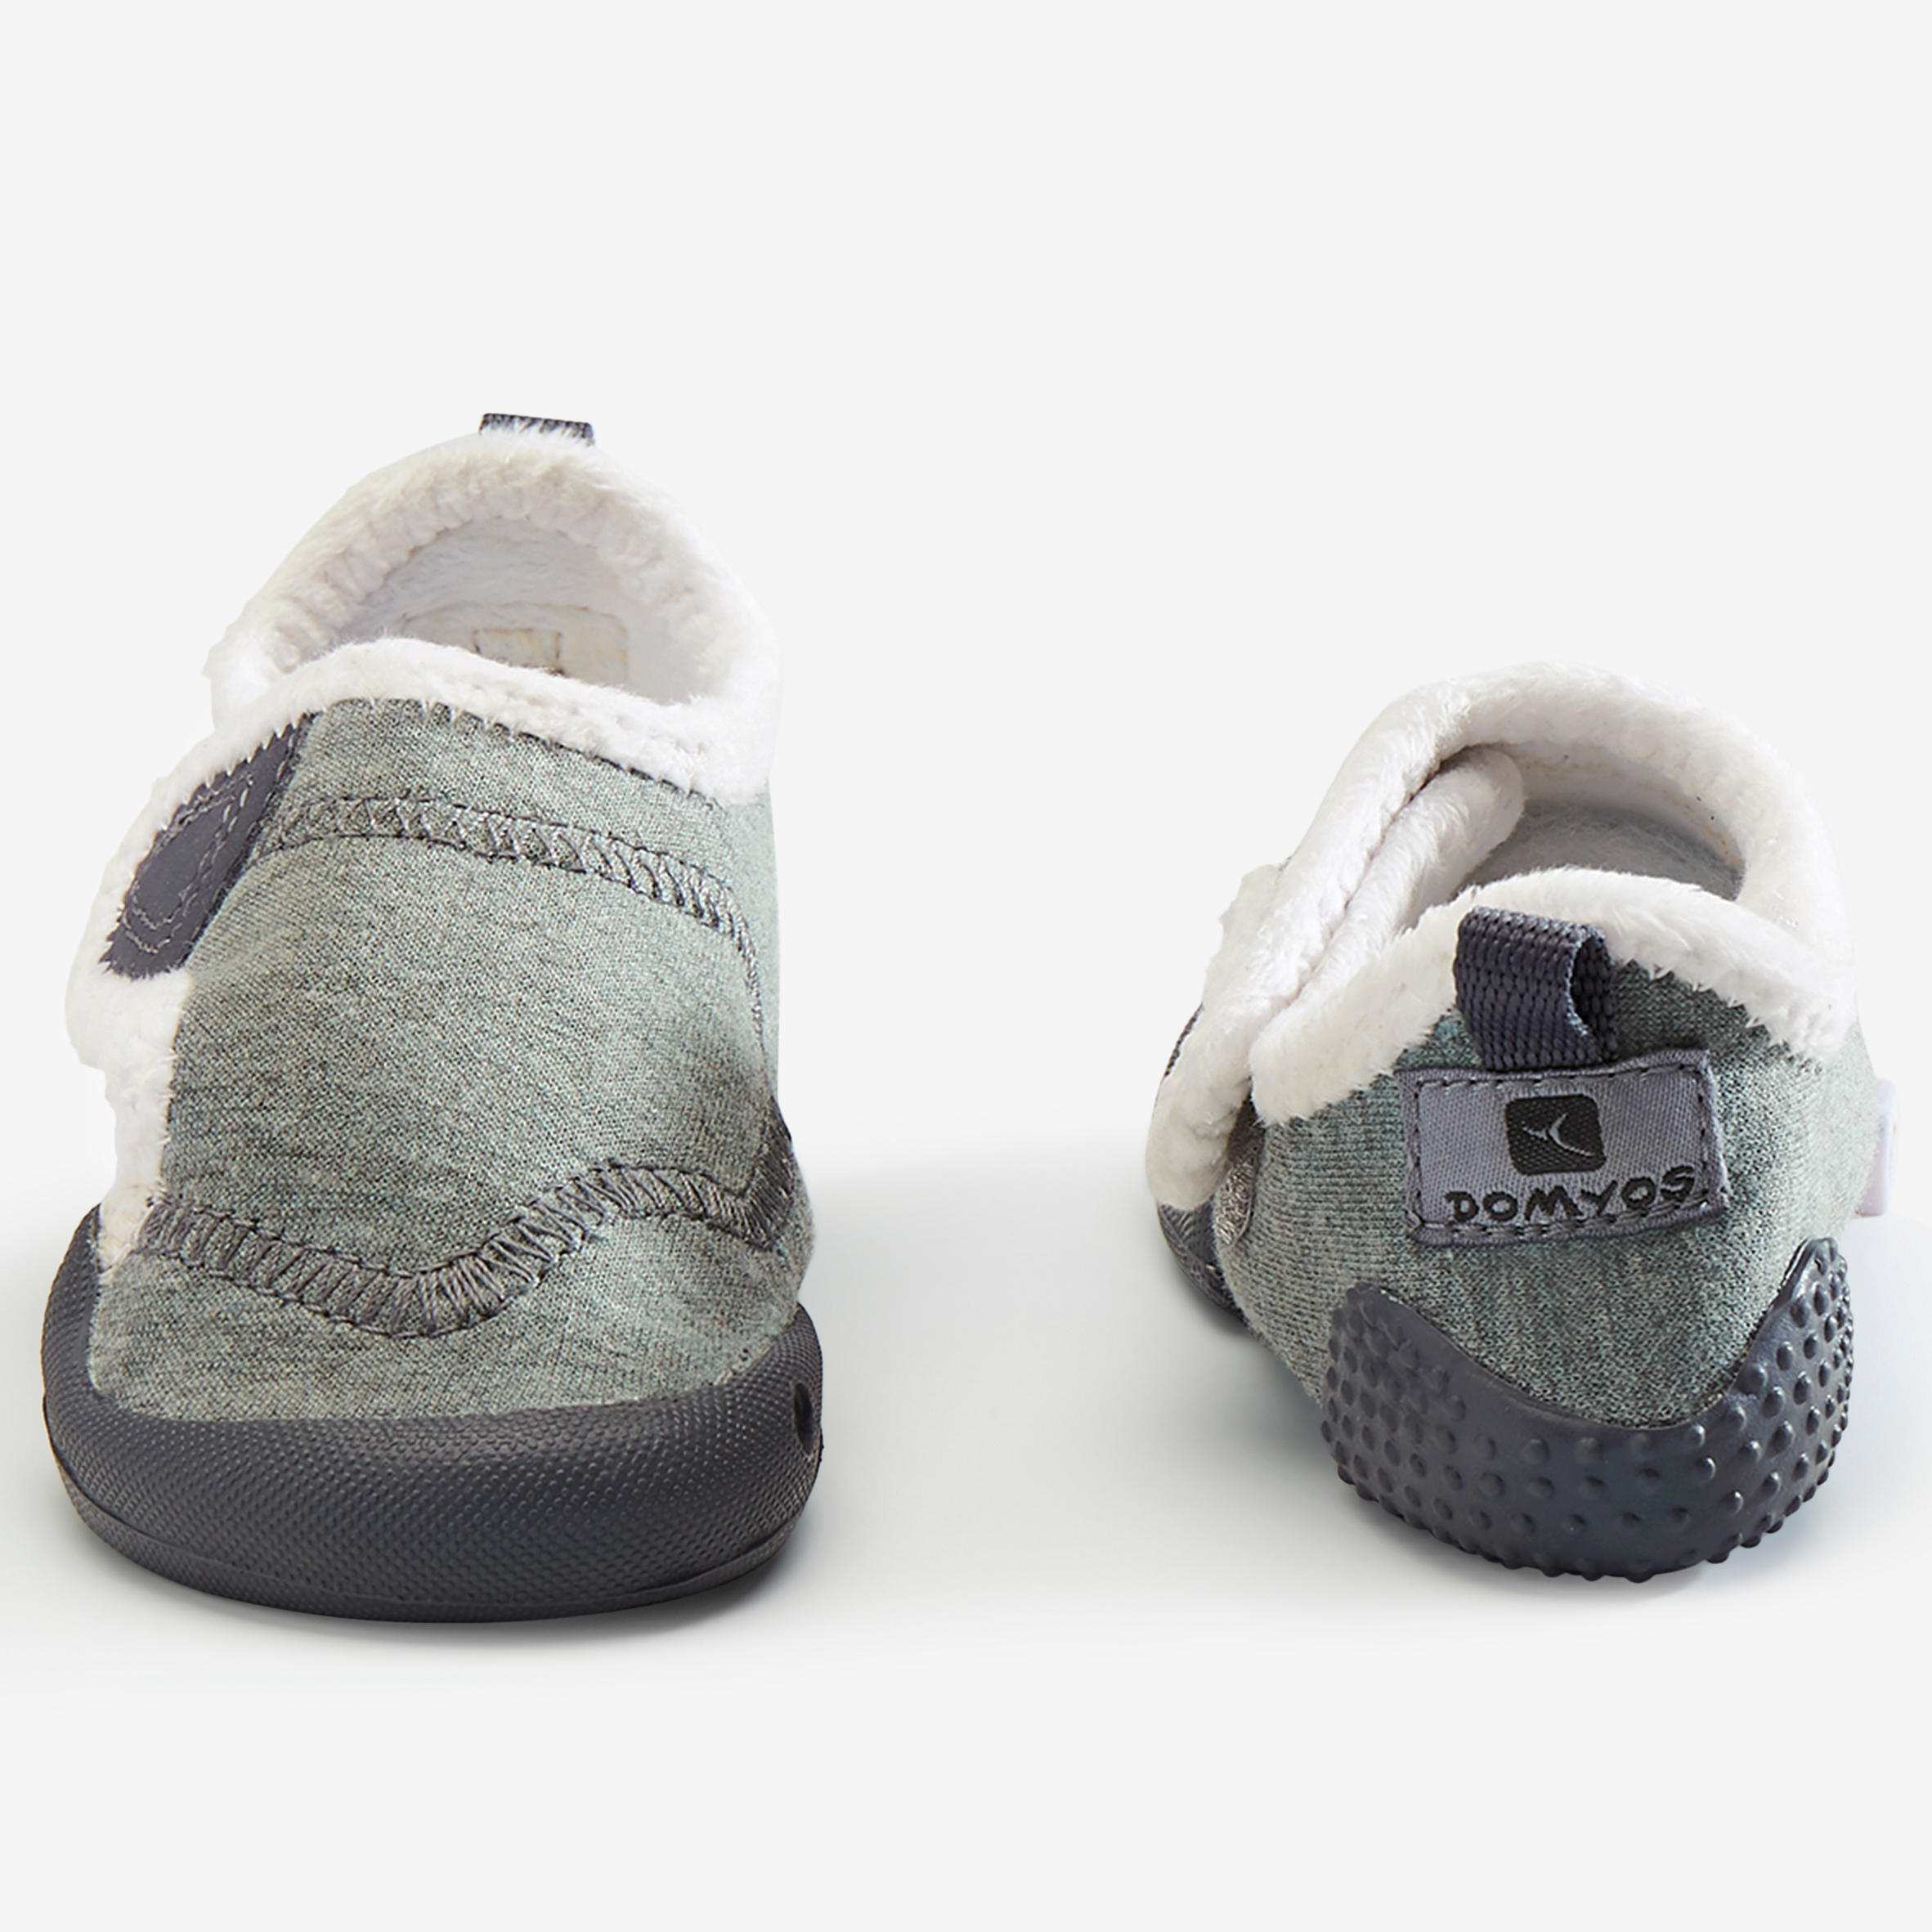 Kids' Soft and Non-Slip Bootee 3/8